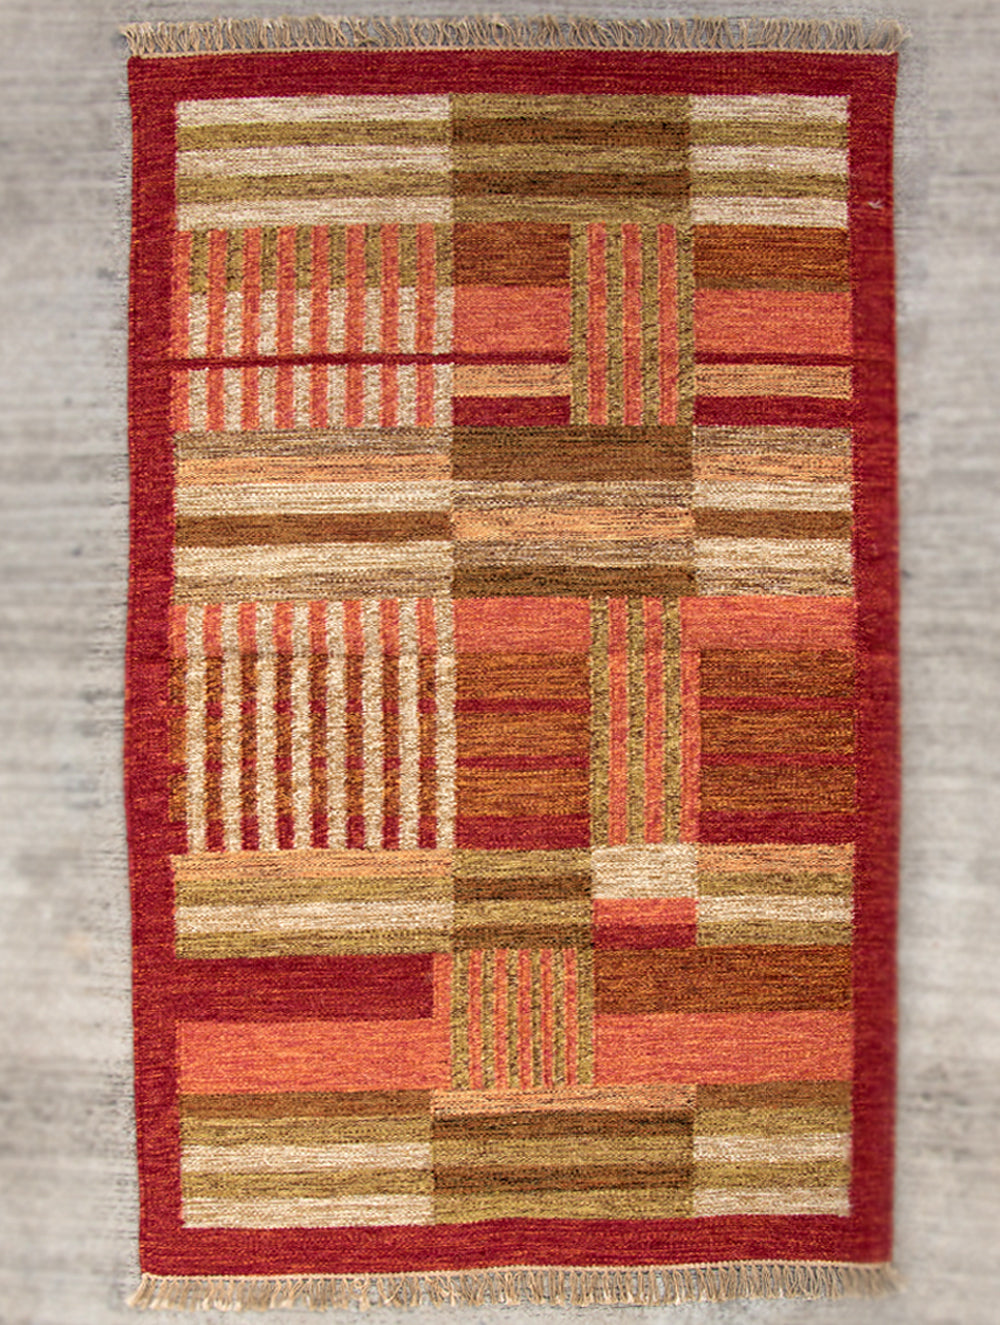 Load image into Gallery viewer, Handwoven Kilim Rug (8 x 5 ft) - Geometric - The India Craft House 